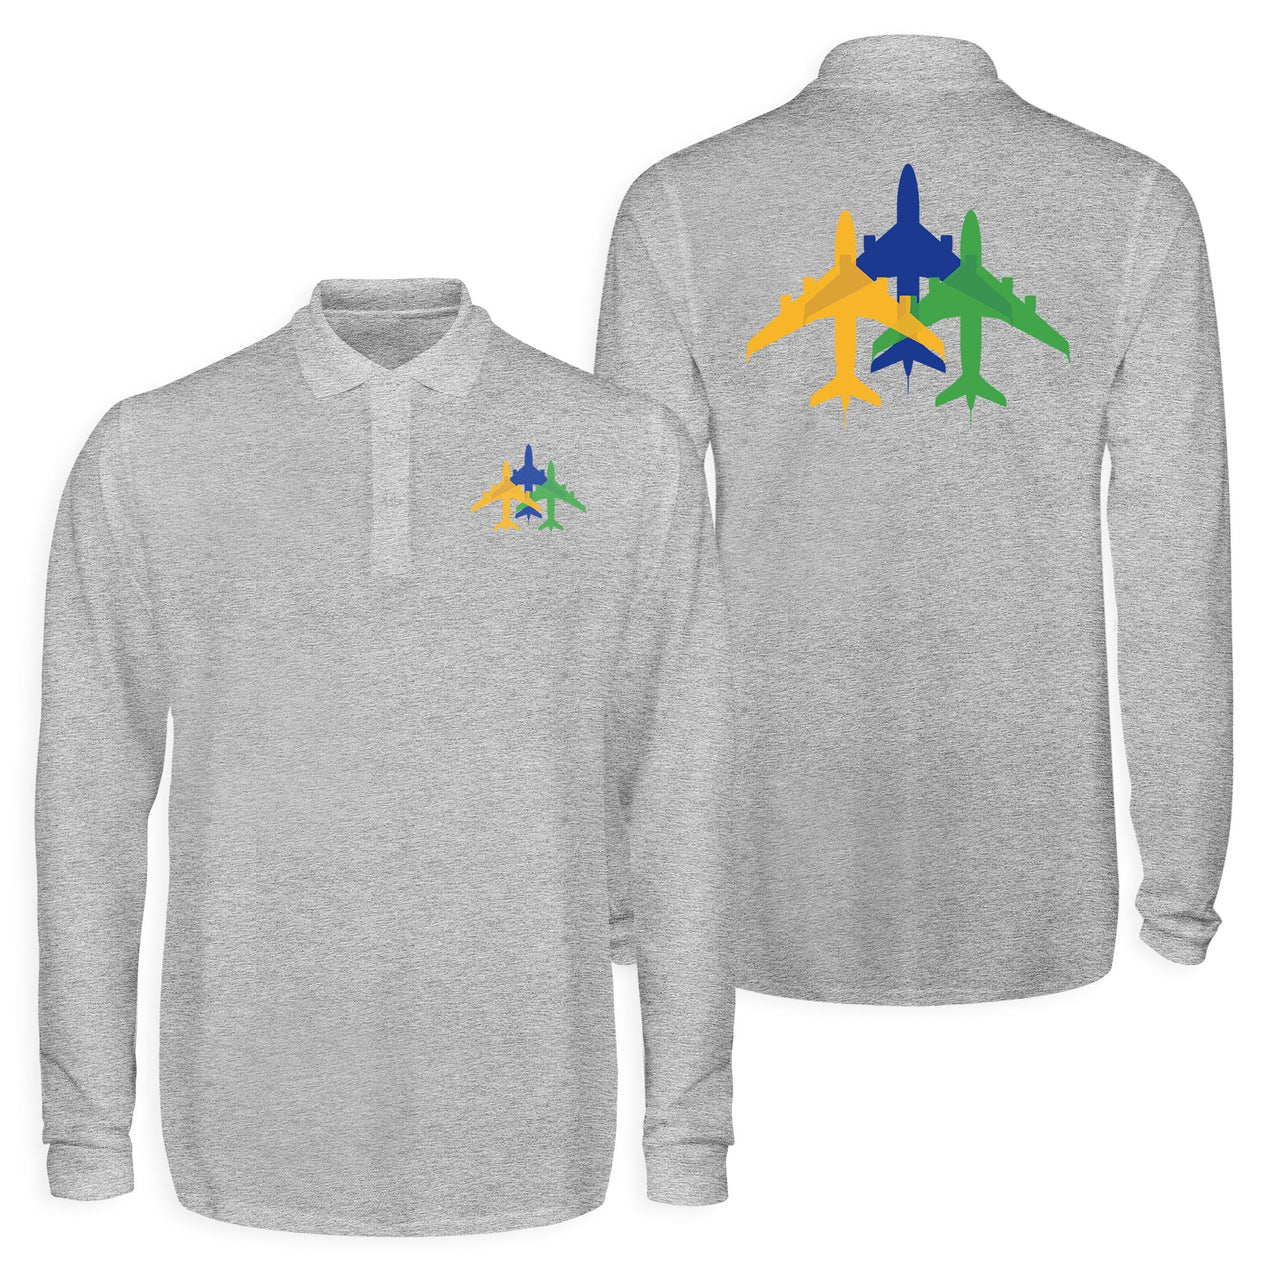 Colourful 3 Airplanes Designed Long Sleeve Polo T-Shirts (Double-Side)